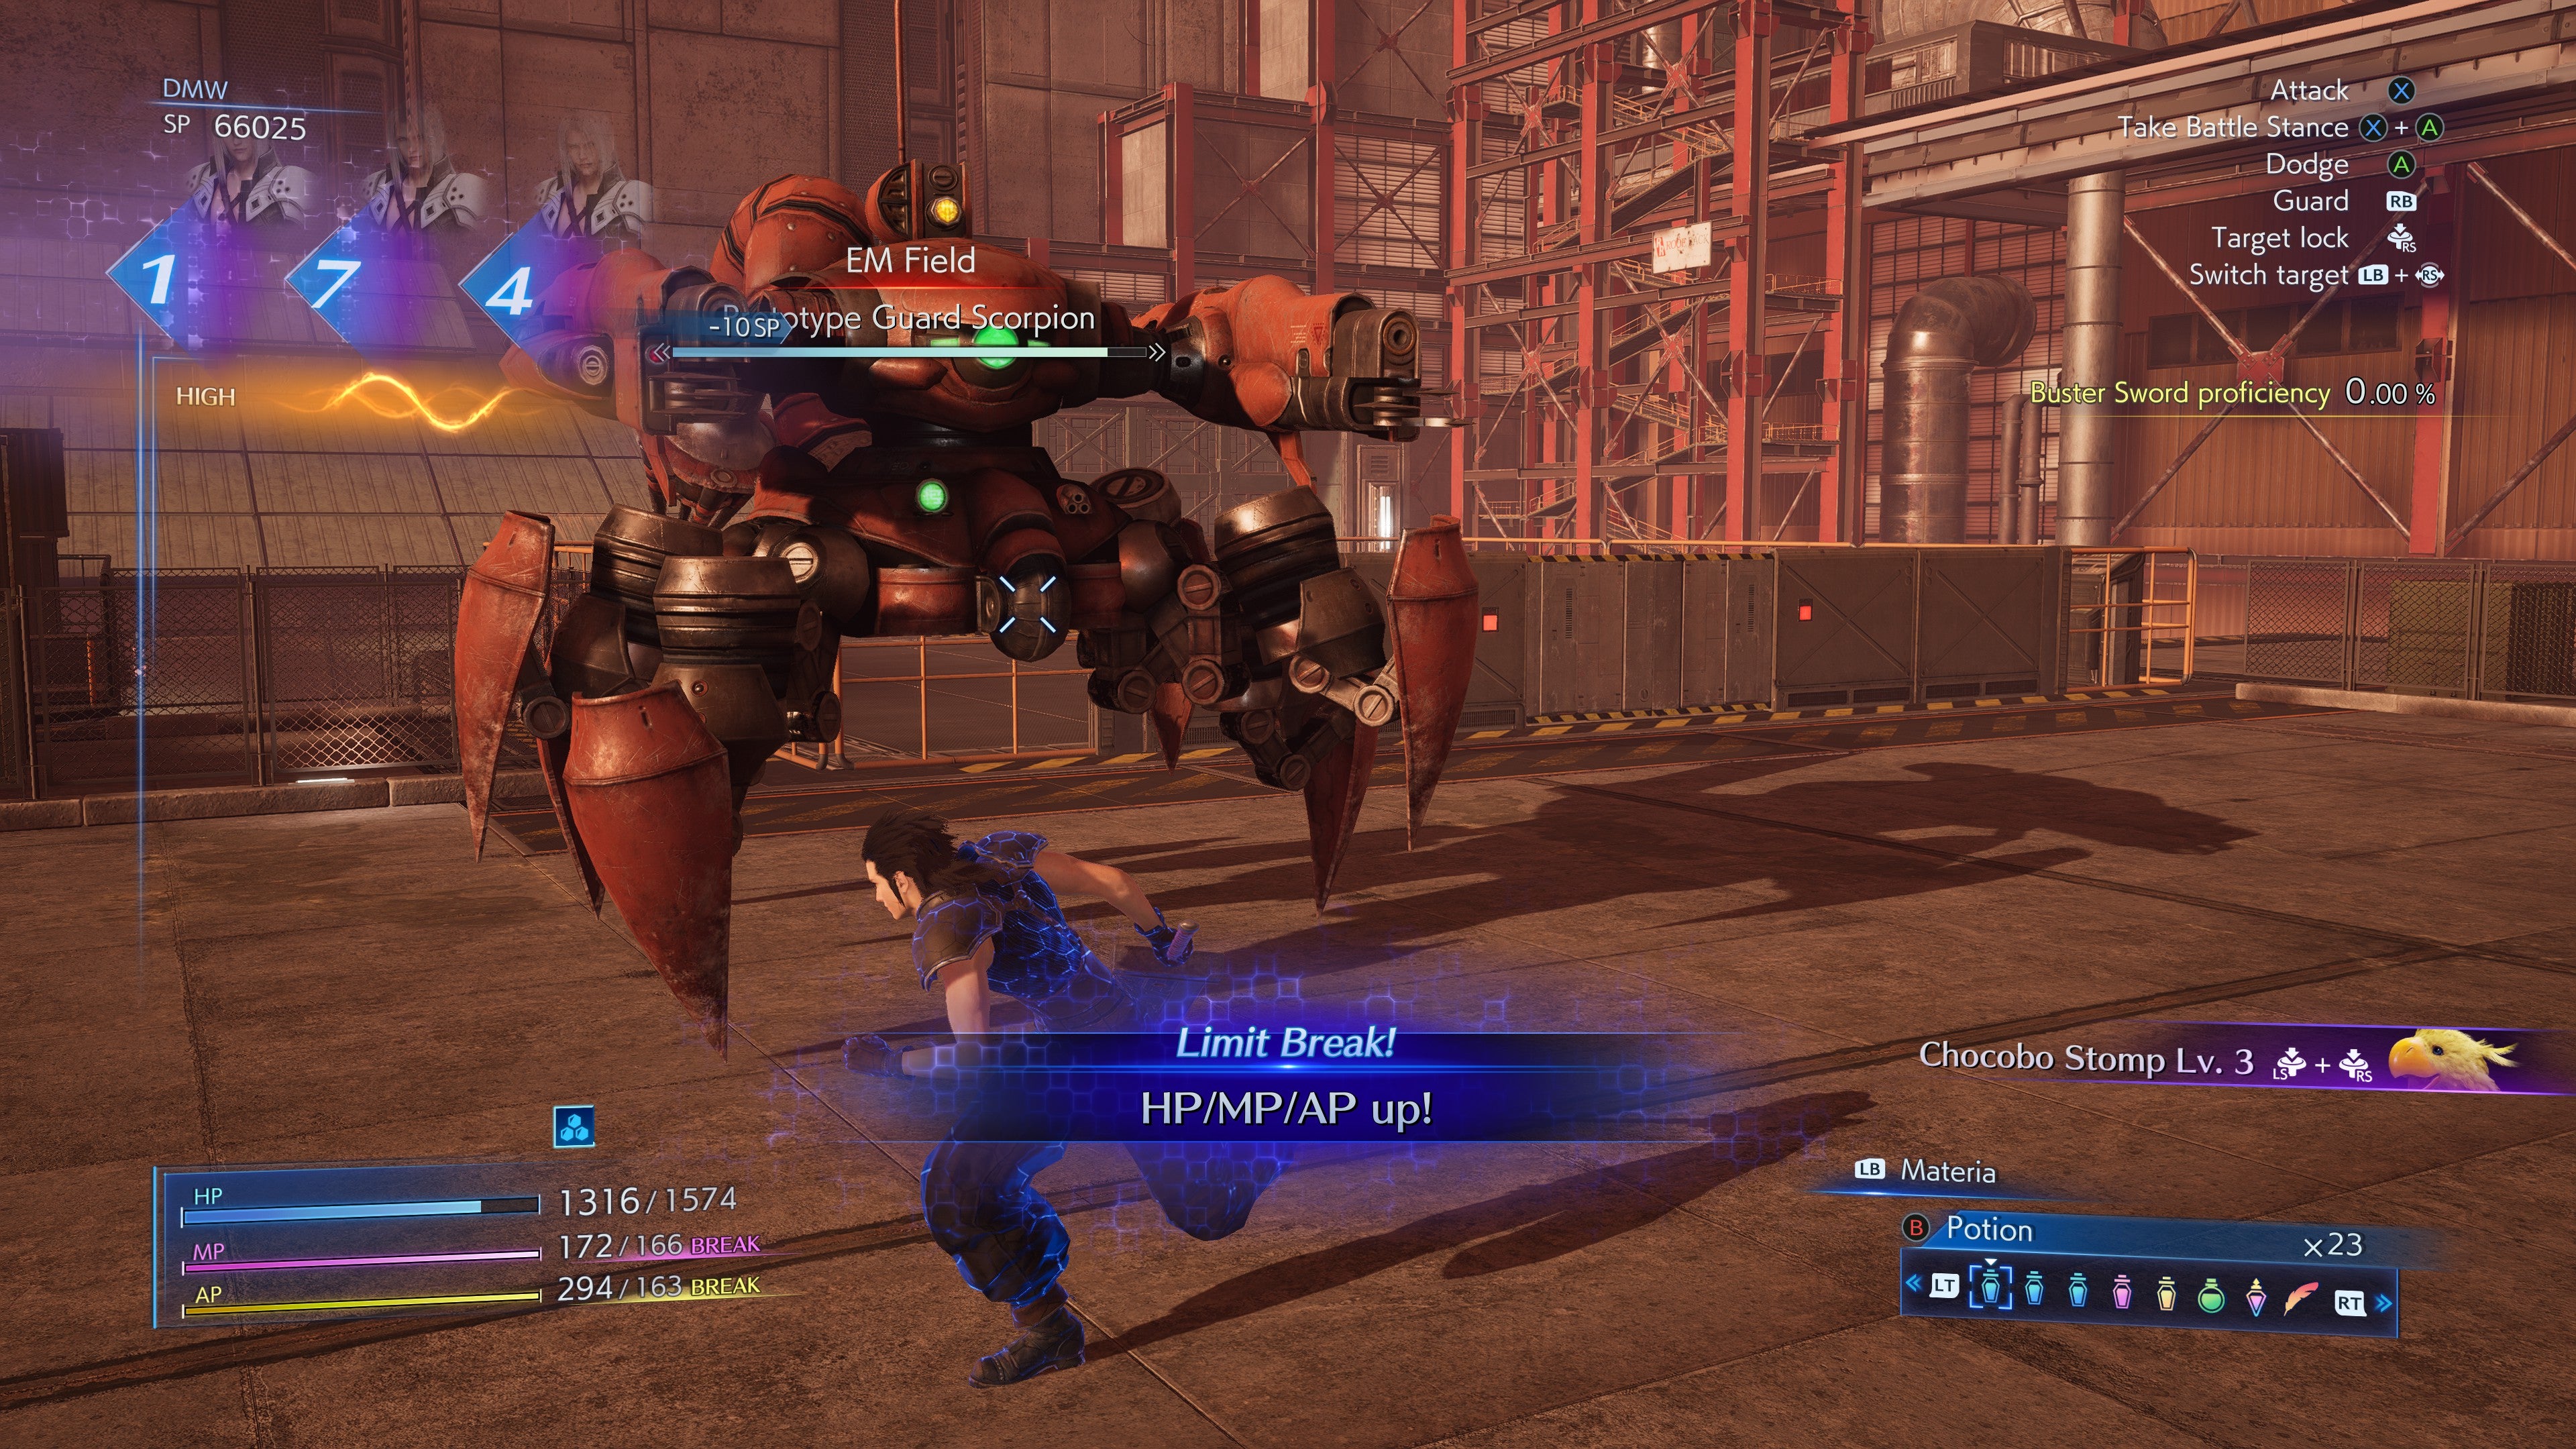 Zack fights a large metal scorpion in an industrial setting in Crisis Core - Final Fantasy VII - Reunion.